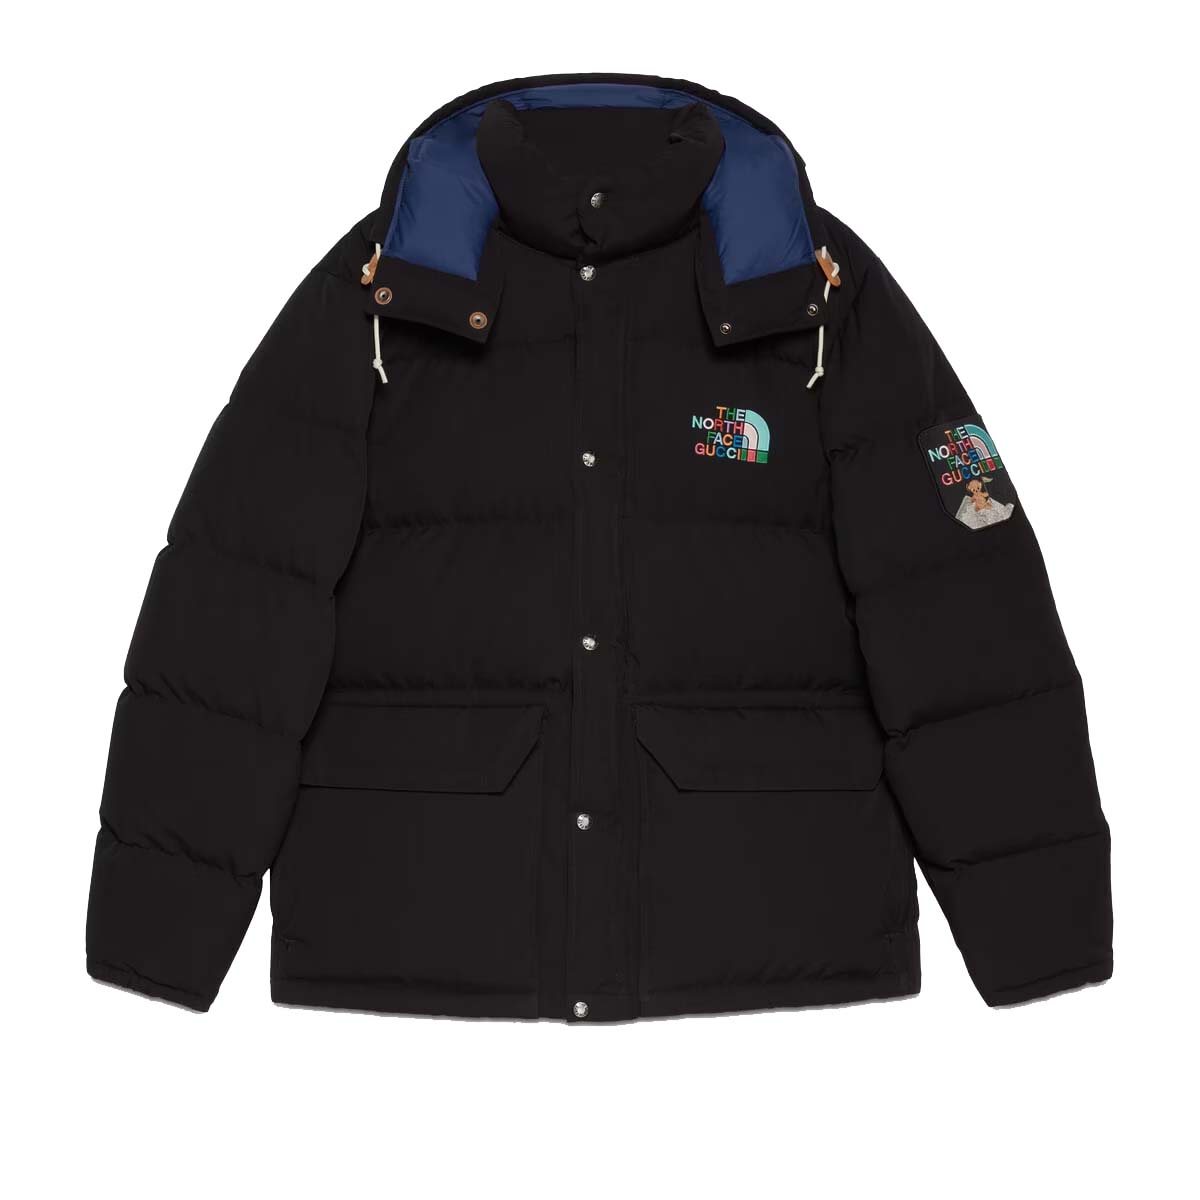 Gucci x The North Face Down Jacket Black Men's - FW22 - US